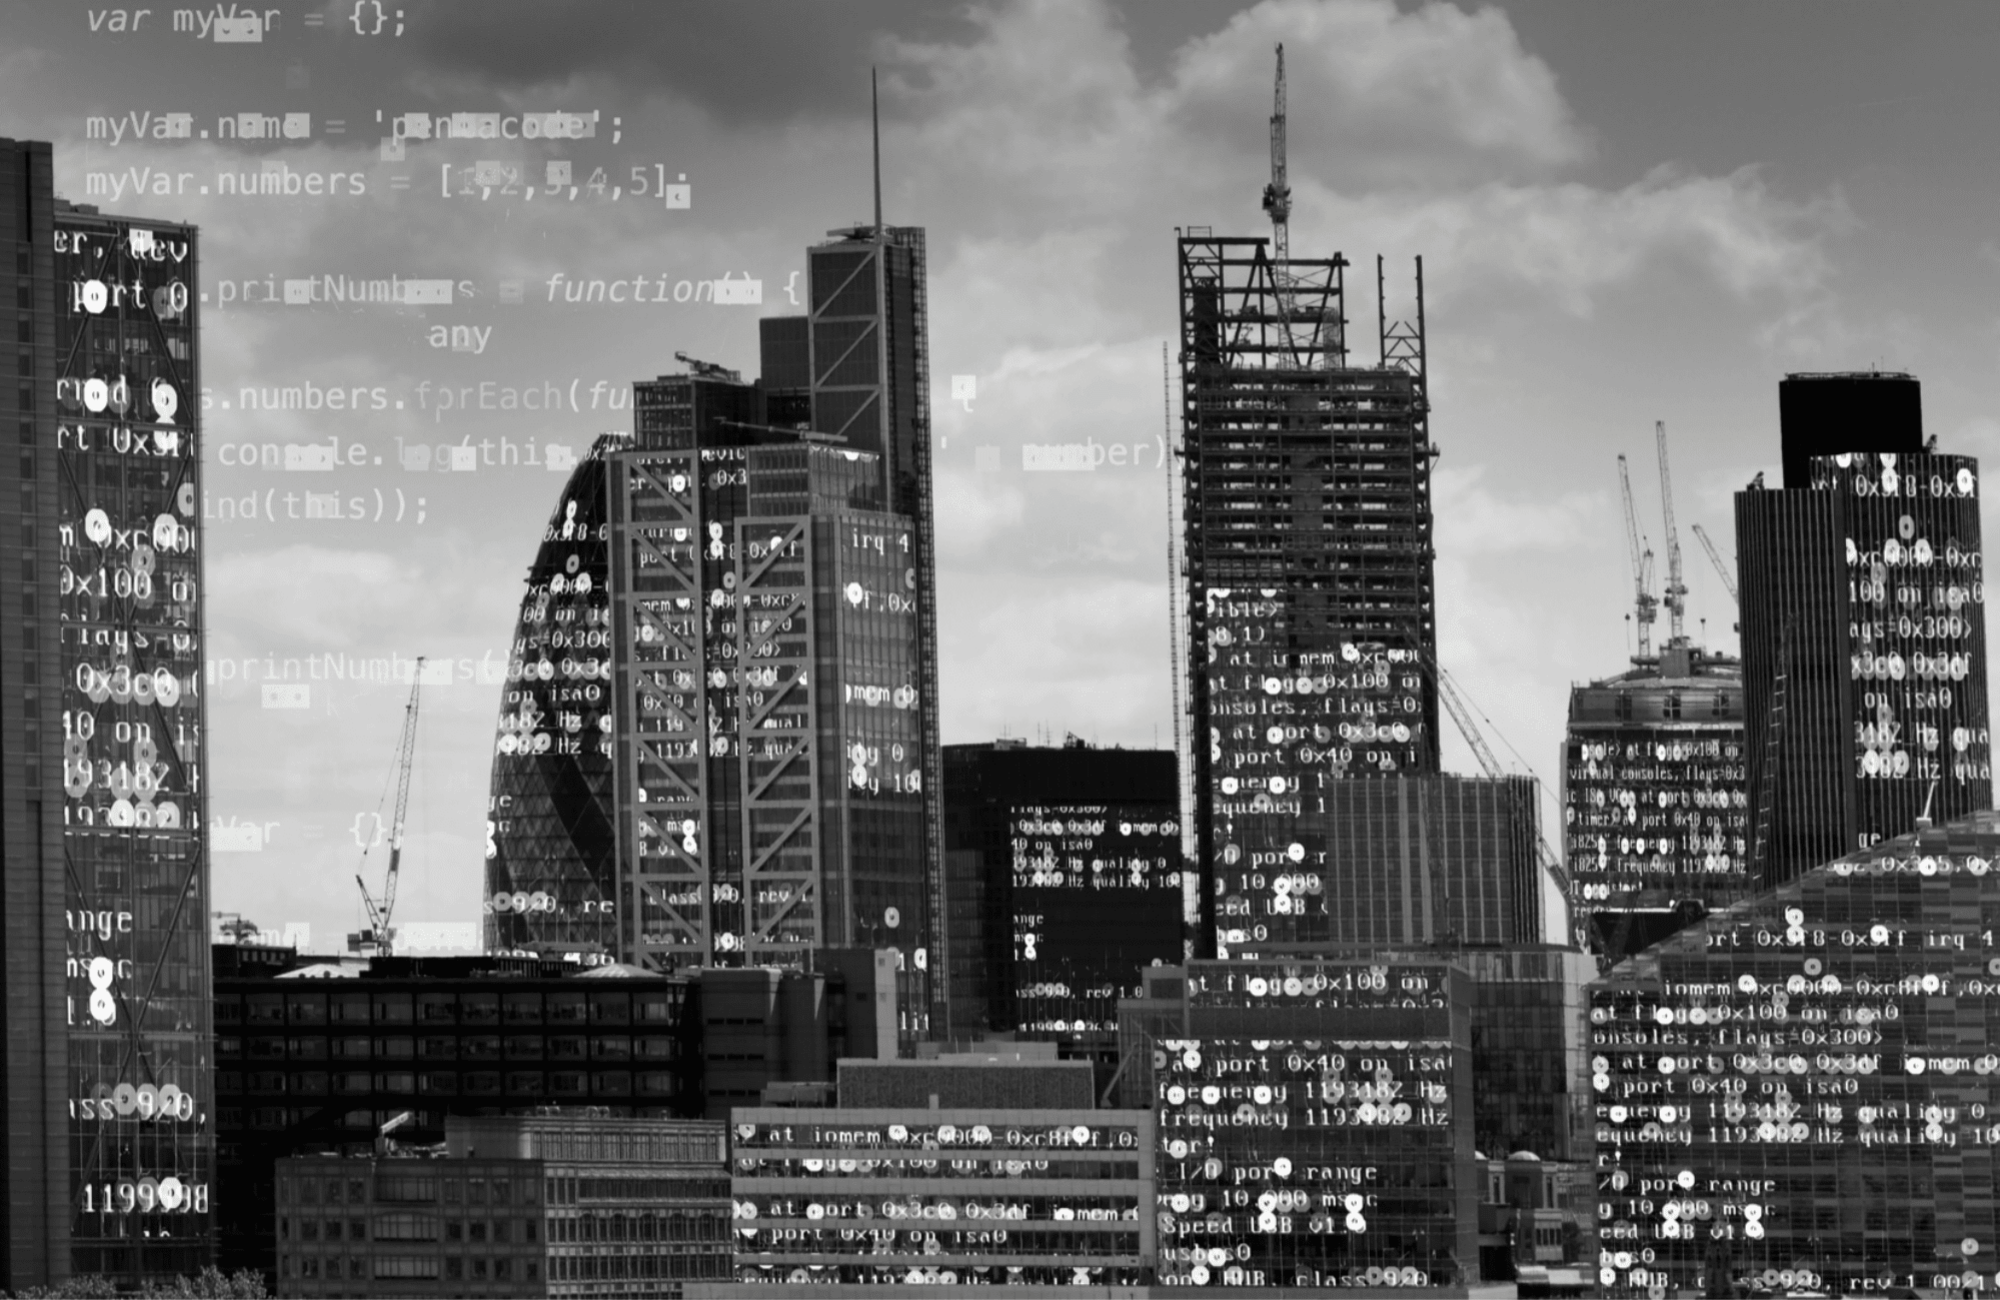 Gigabit group banner image london with code greyscale